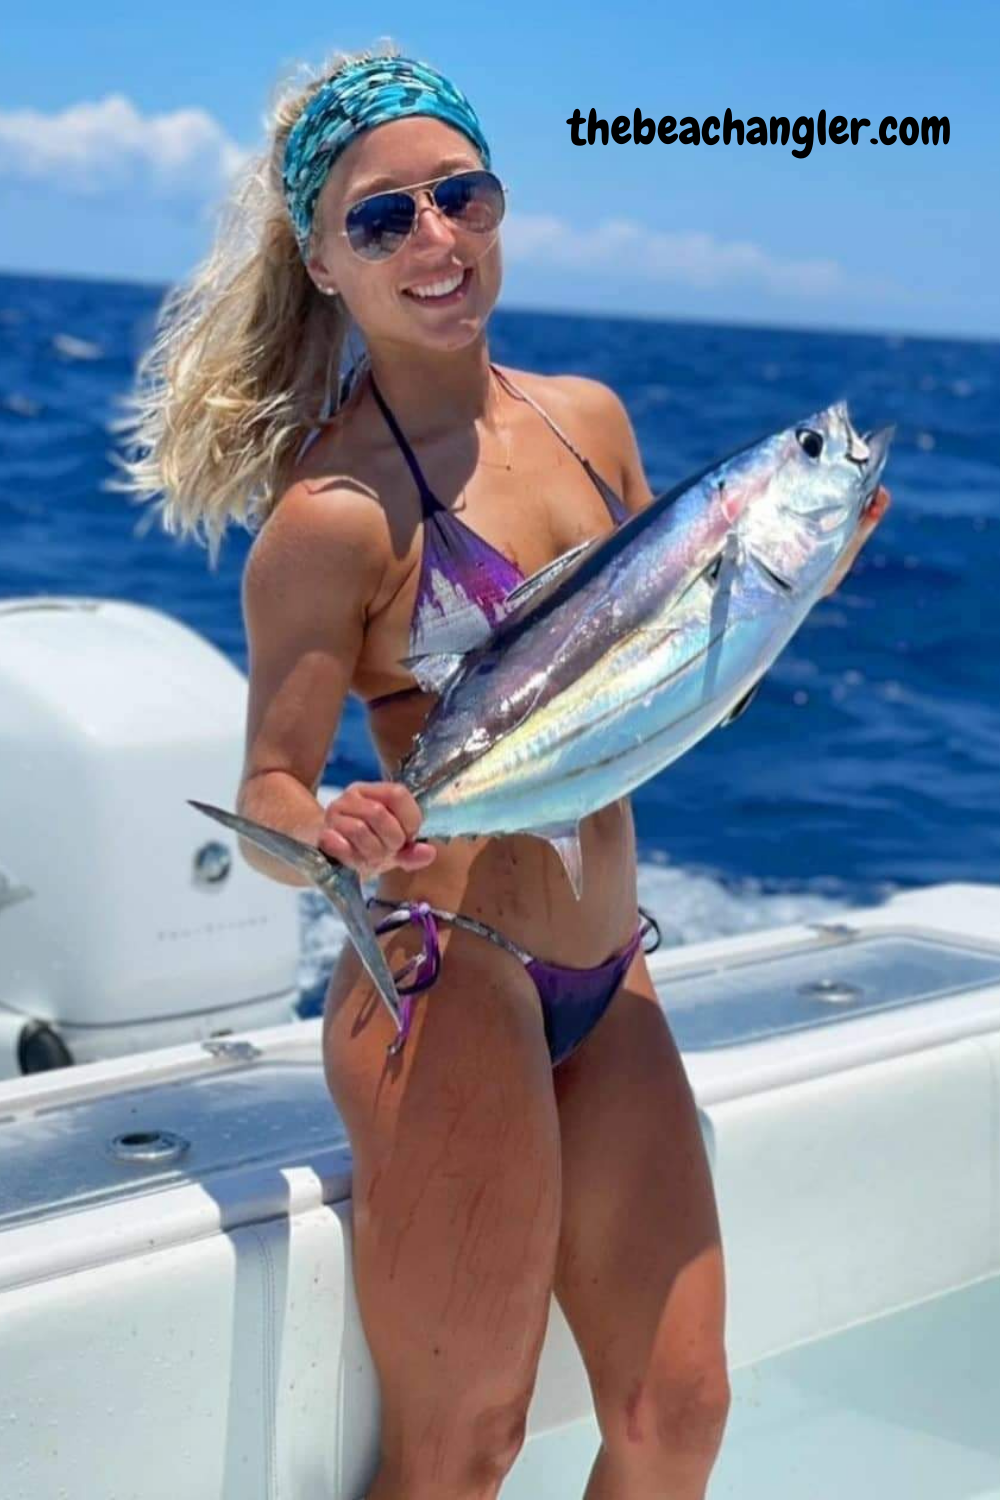 Lady with a live bonita. They make great live bait for Marlin. She caught it using live Pilchards caught with a cast net